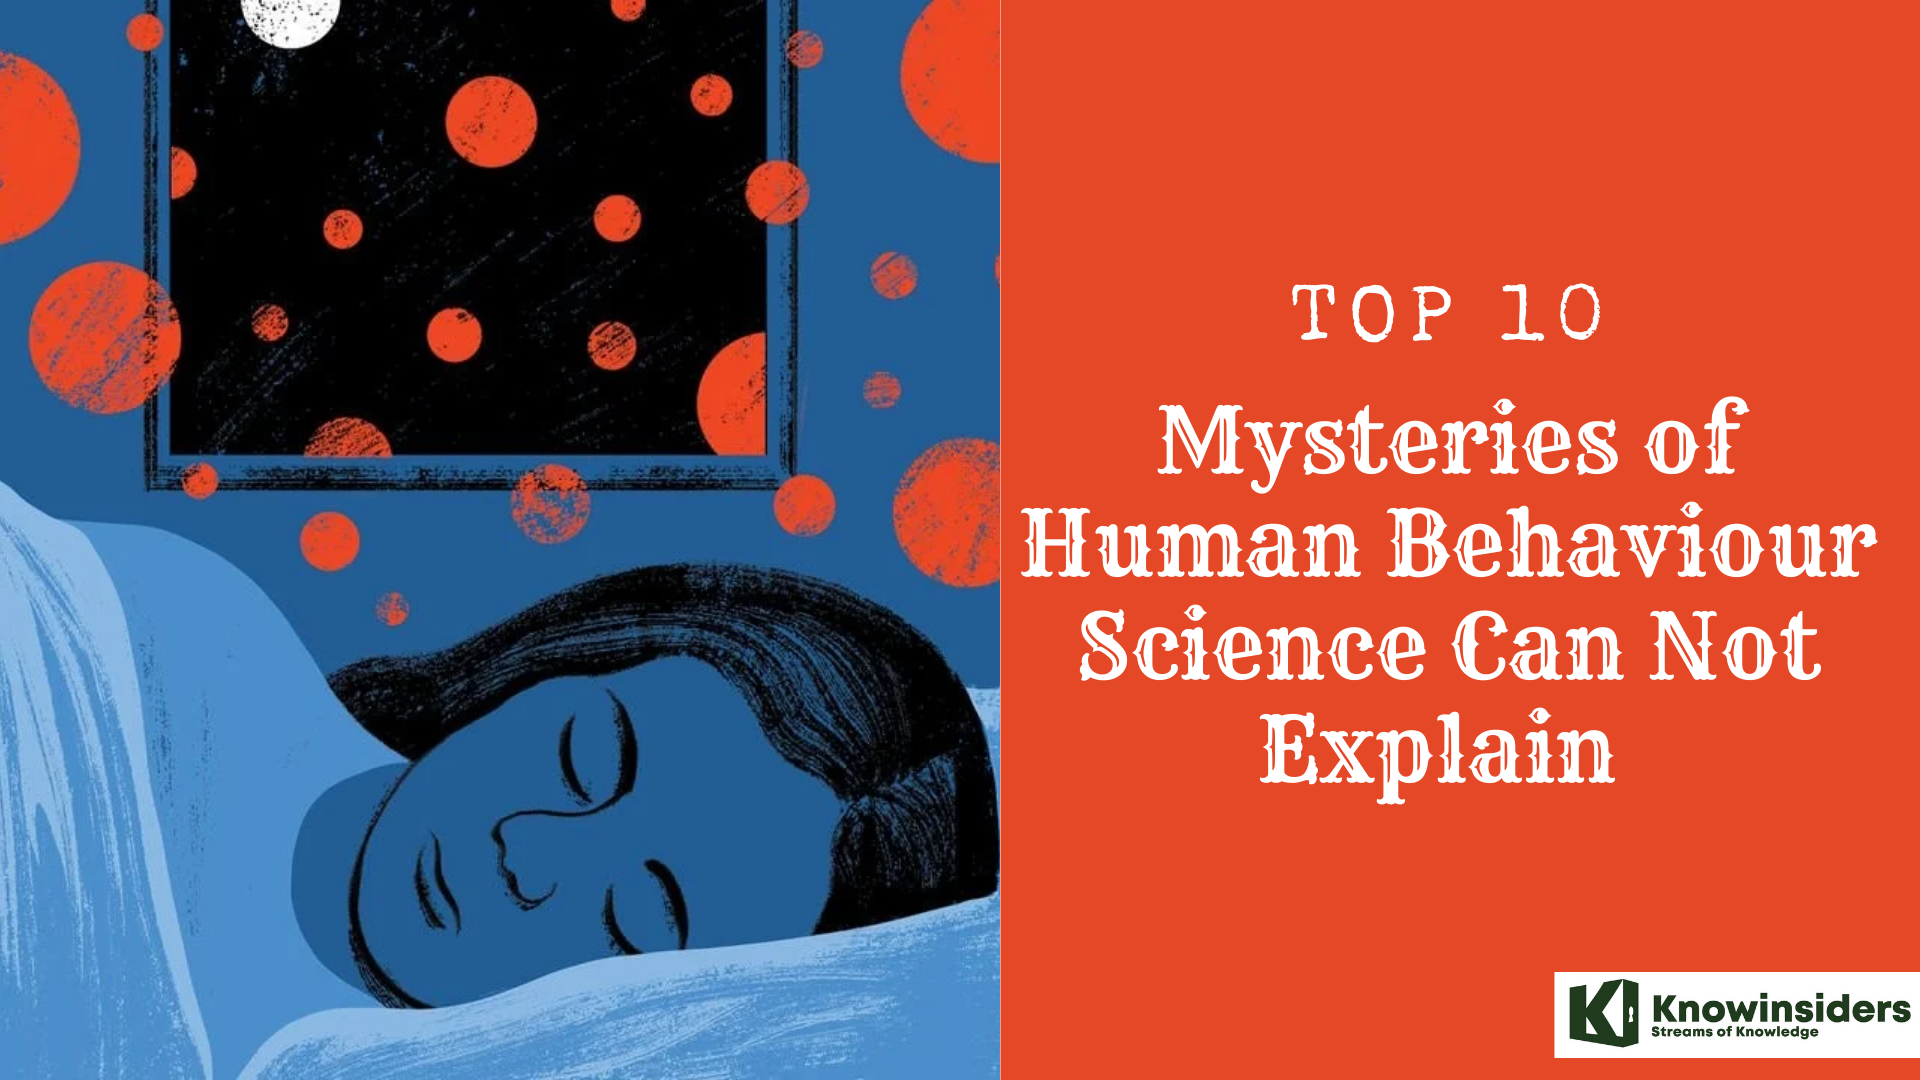 Top 10 Mysteries of Human Behaviour That Science Fails to Explain